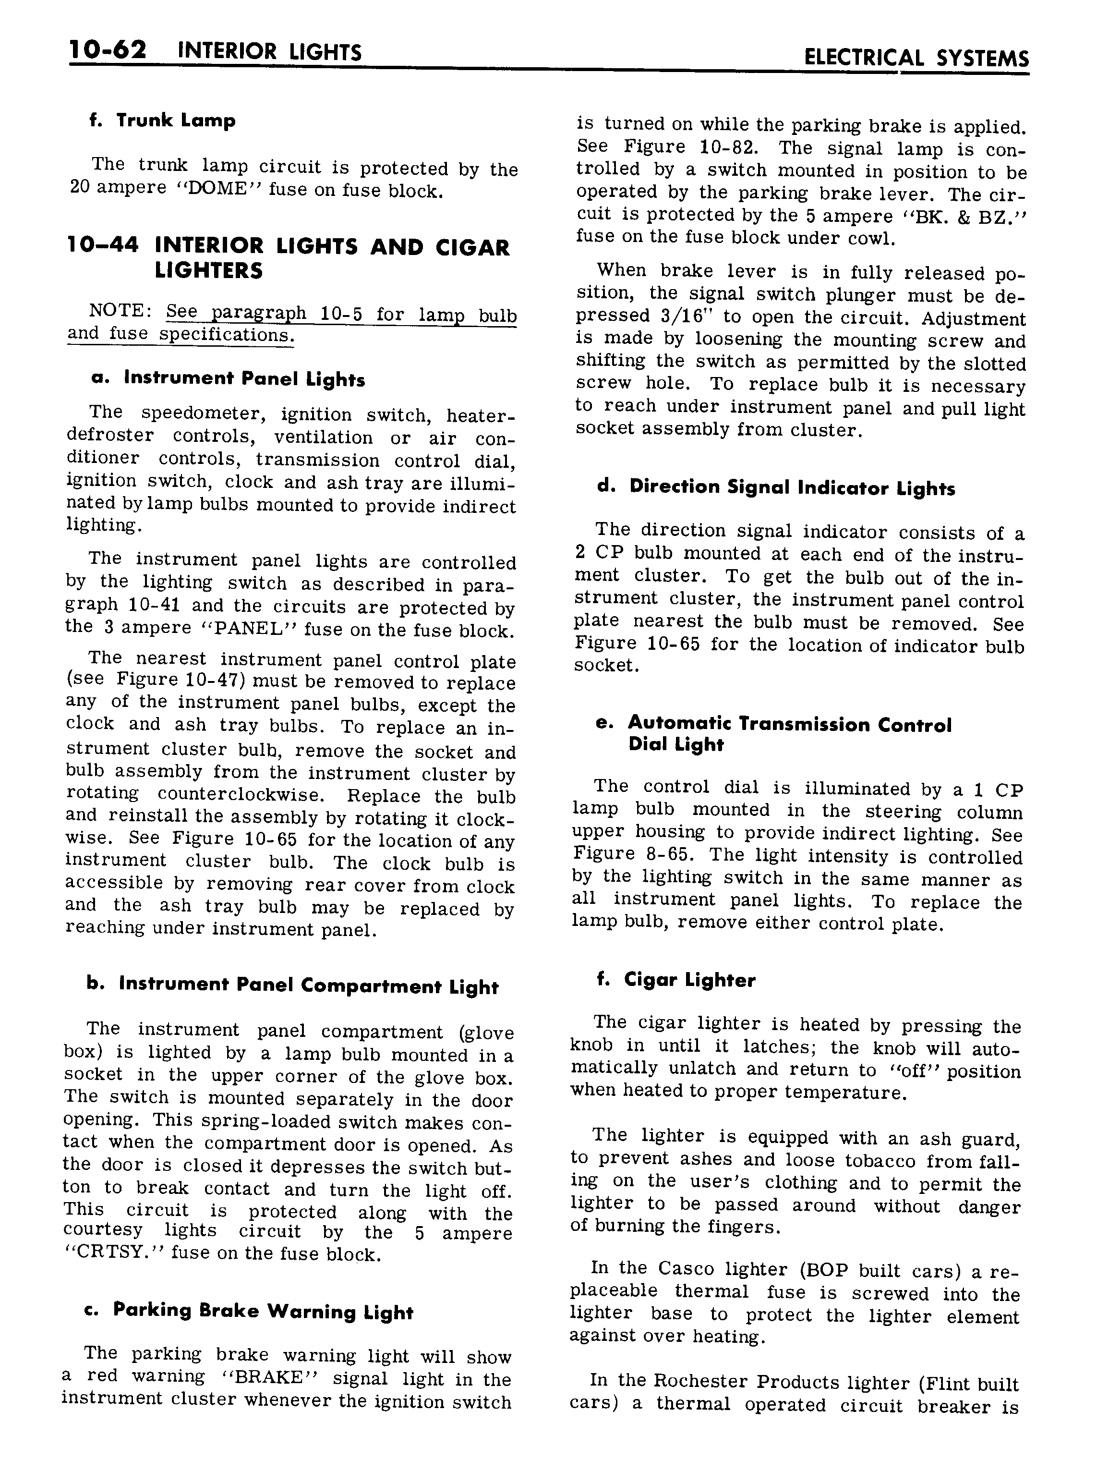 n_10 1961 Buick Shop Manual - Electrical Systems-062-062.jpg